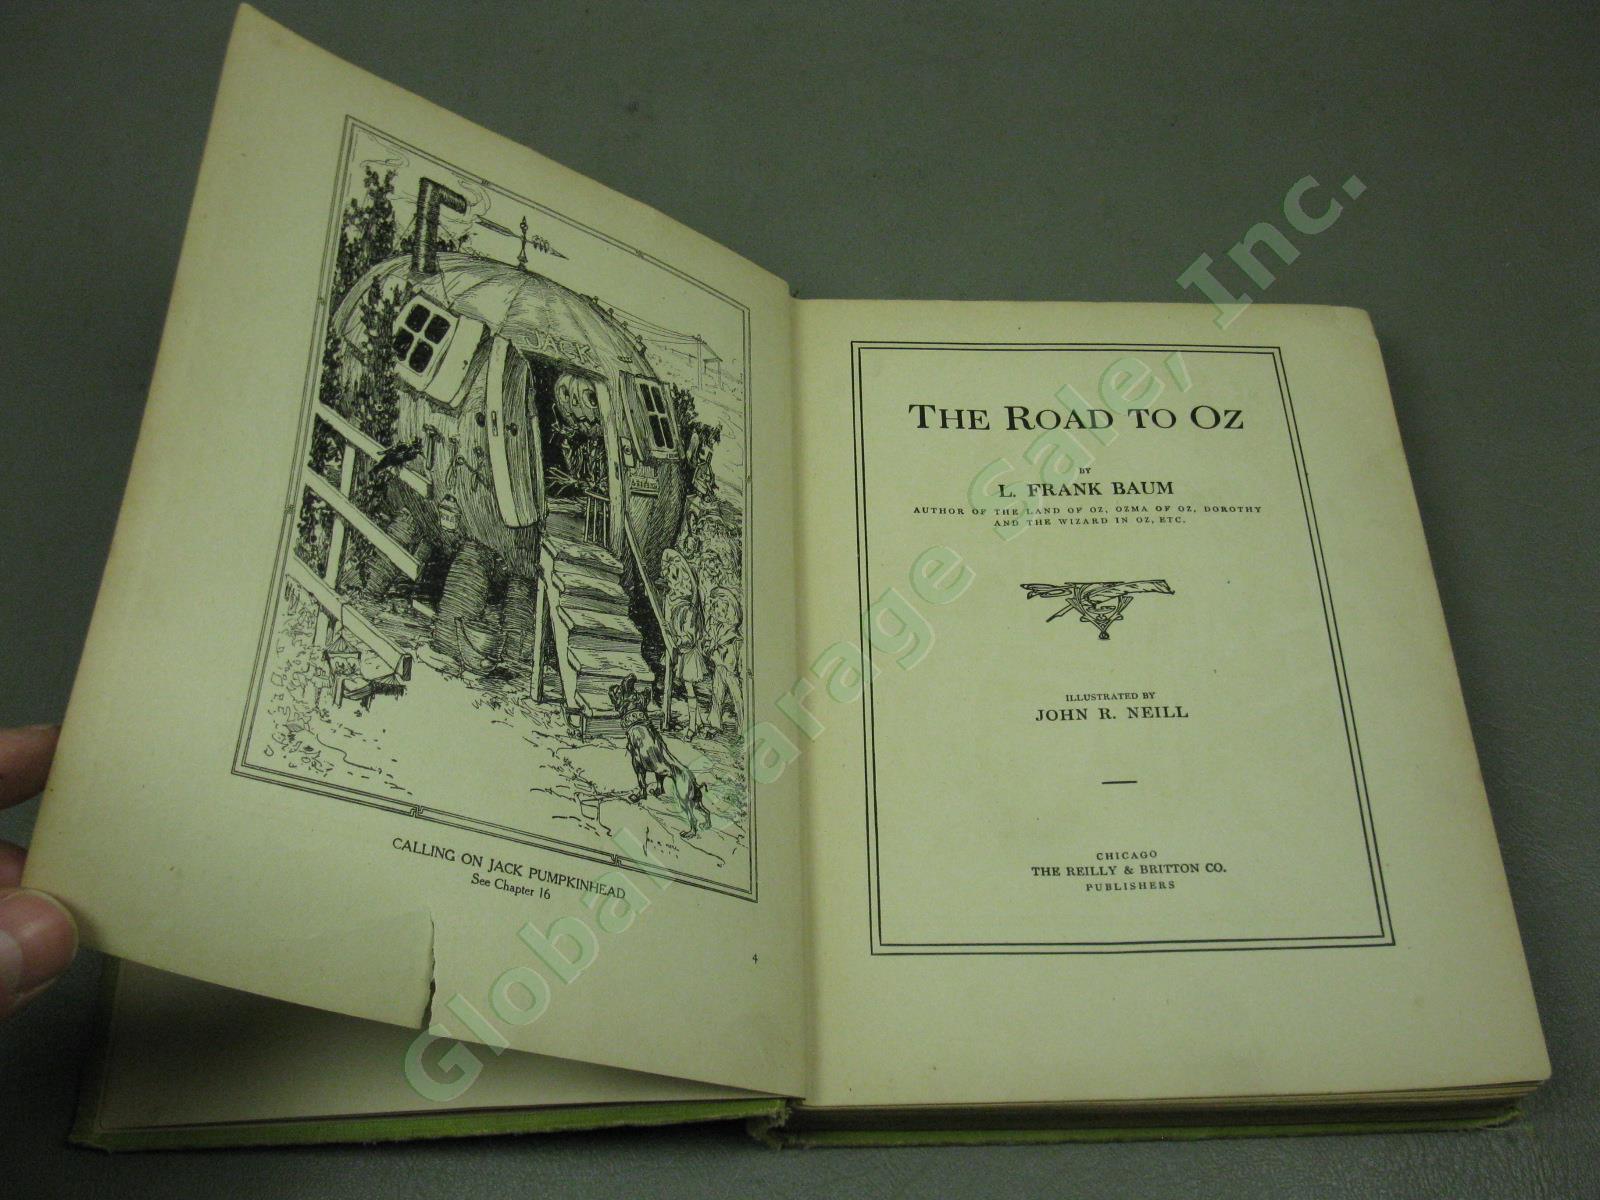 1909 1st Edition The Road To Oz By Wizard Author L Frank Baum Vtg Hardcover Book 5